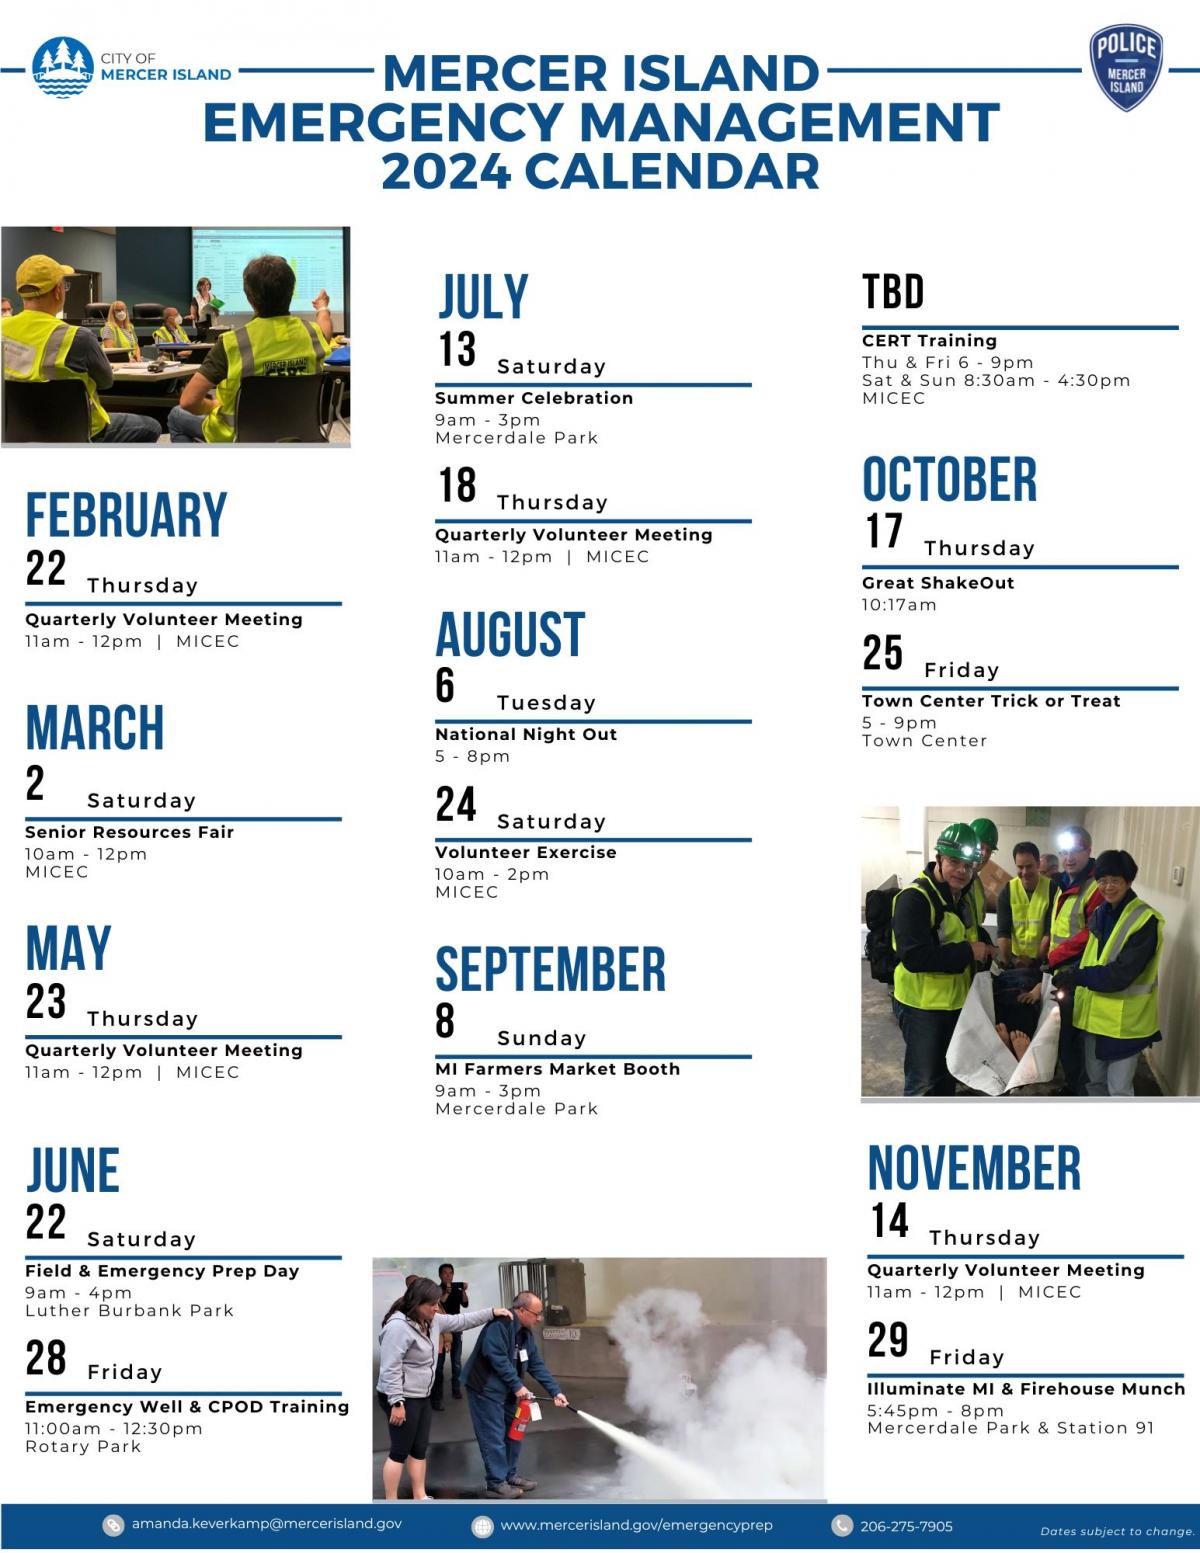 Emergency Management 2024 Calendar of Events and Trainings